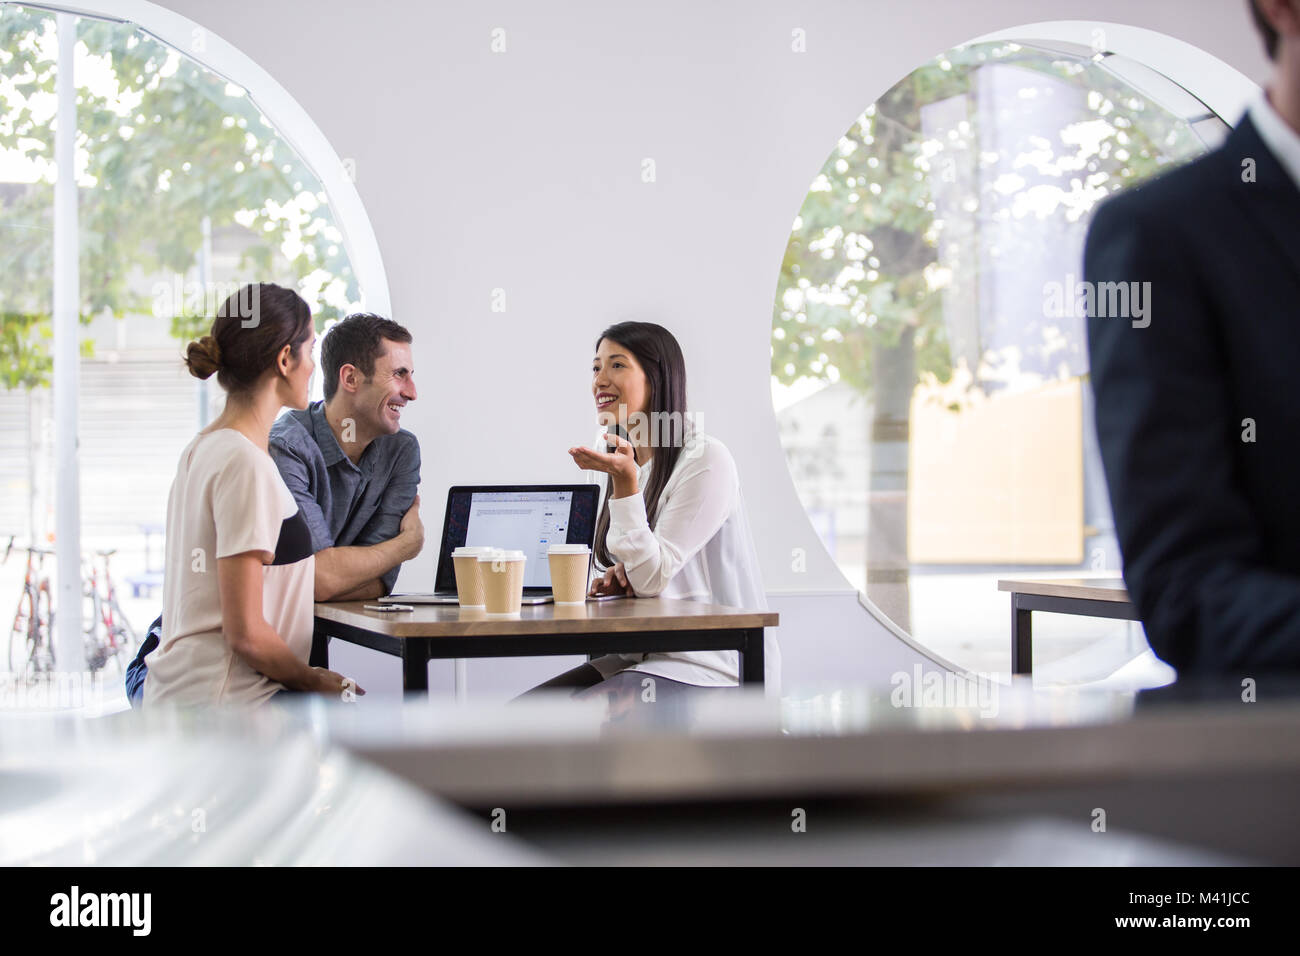 Colleagues having a casual business meeting Stock Photo